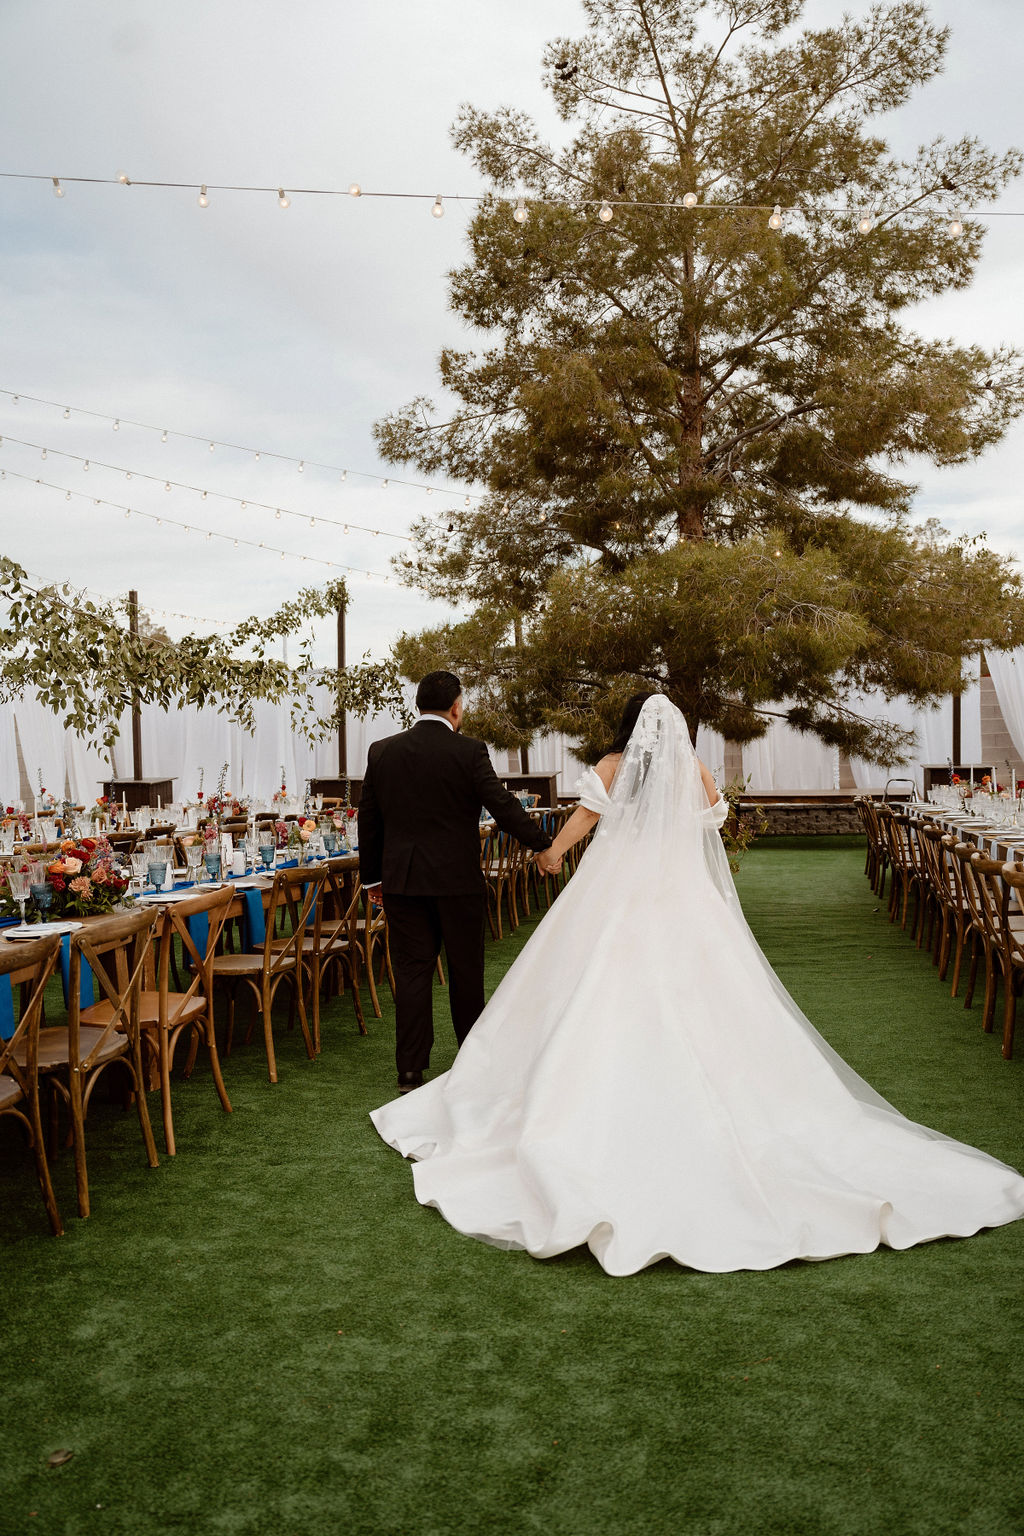 A bride in a long white gown and veil holding hands with a groom in a black suit as they walk towards an outdoor wedding reception area decorated with lights and tables.